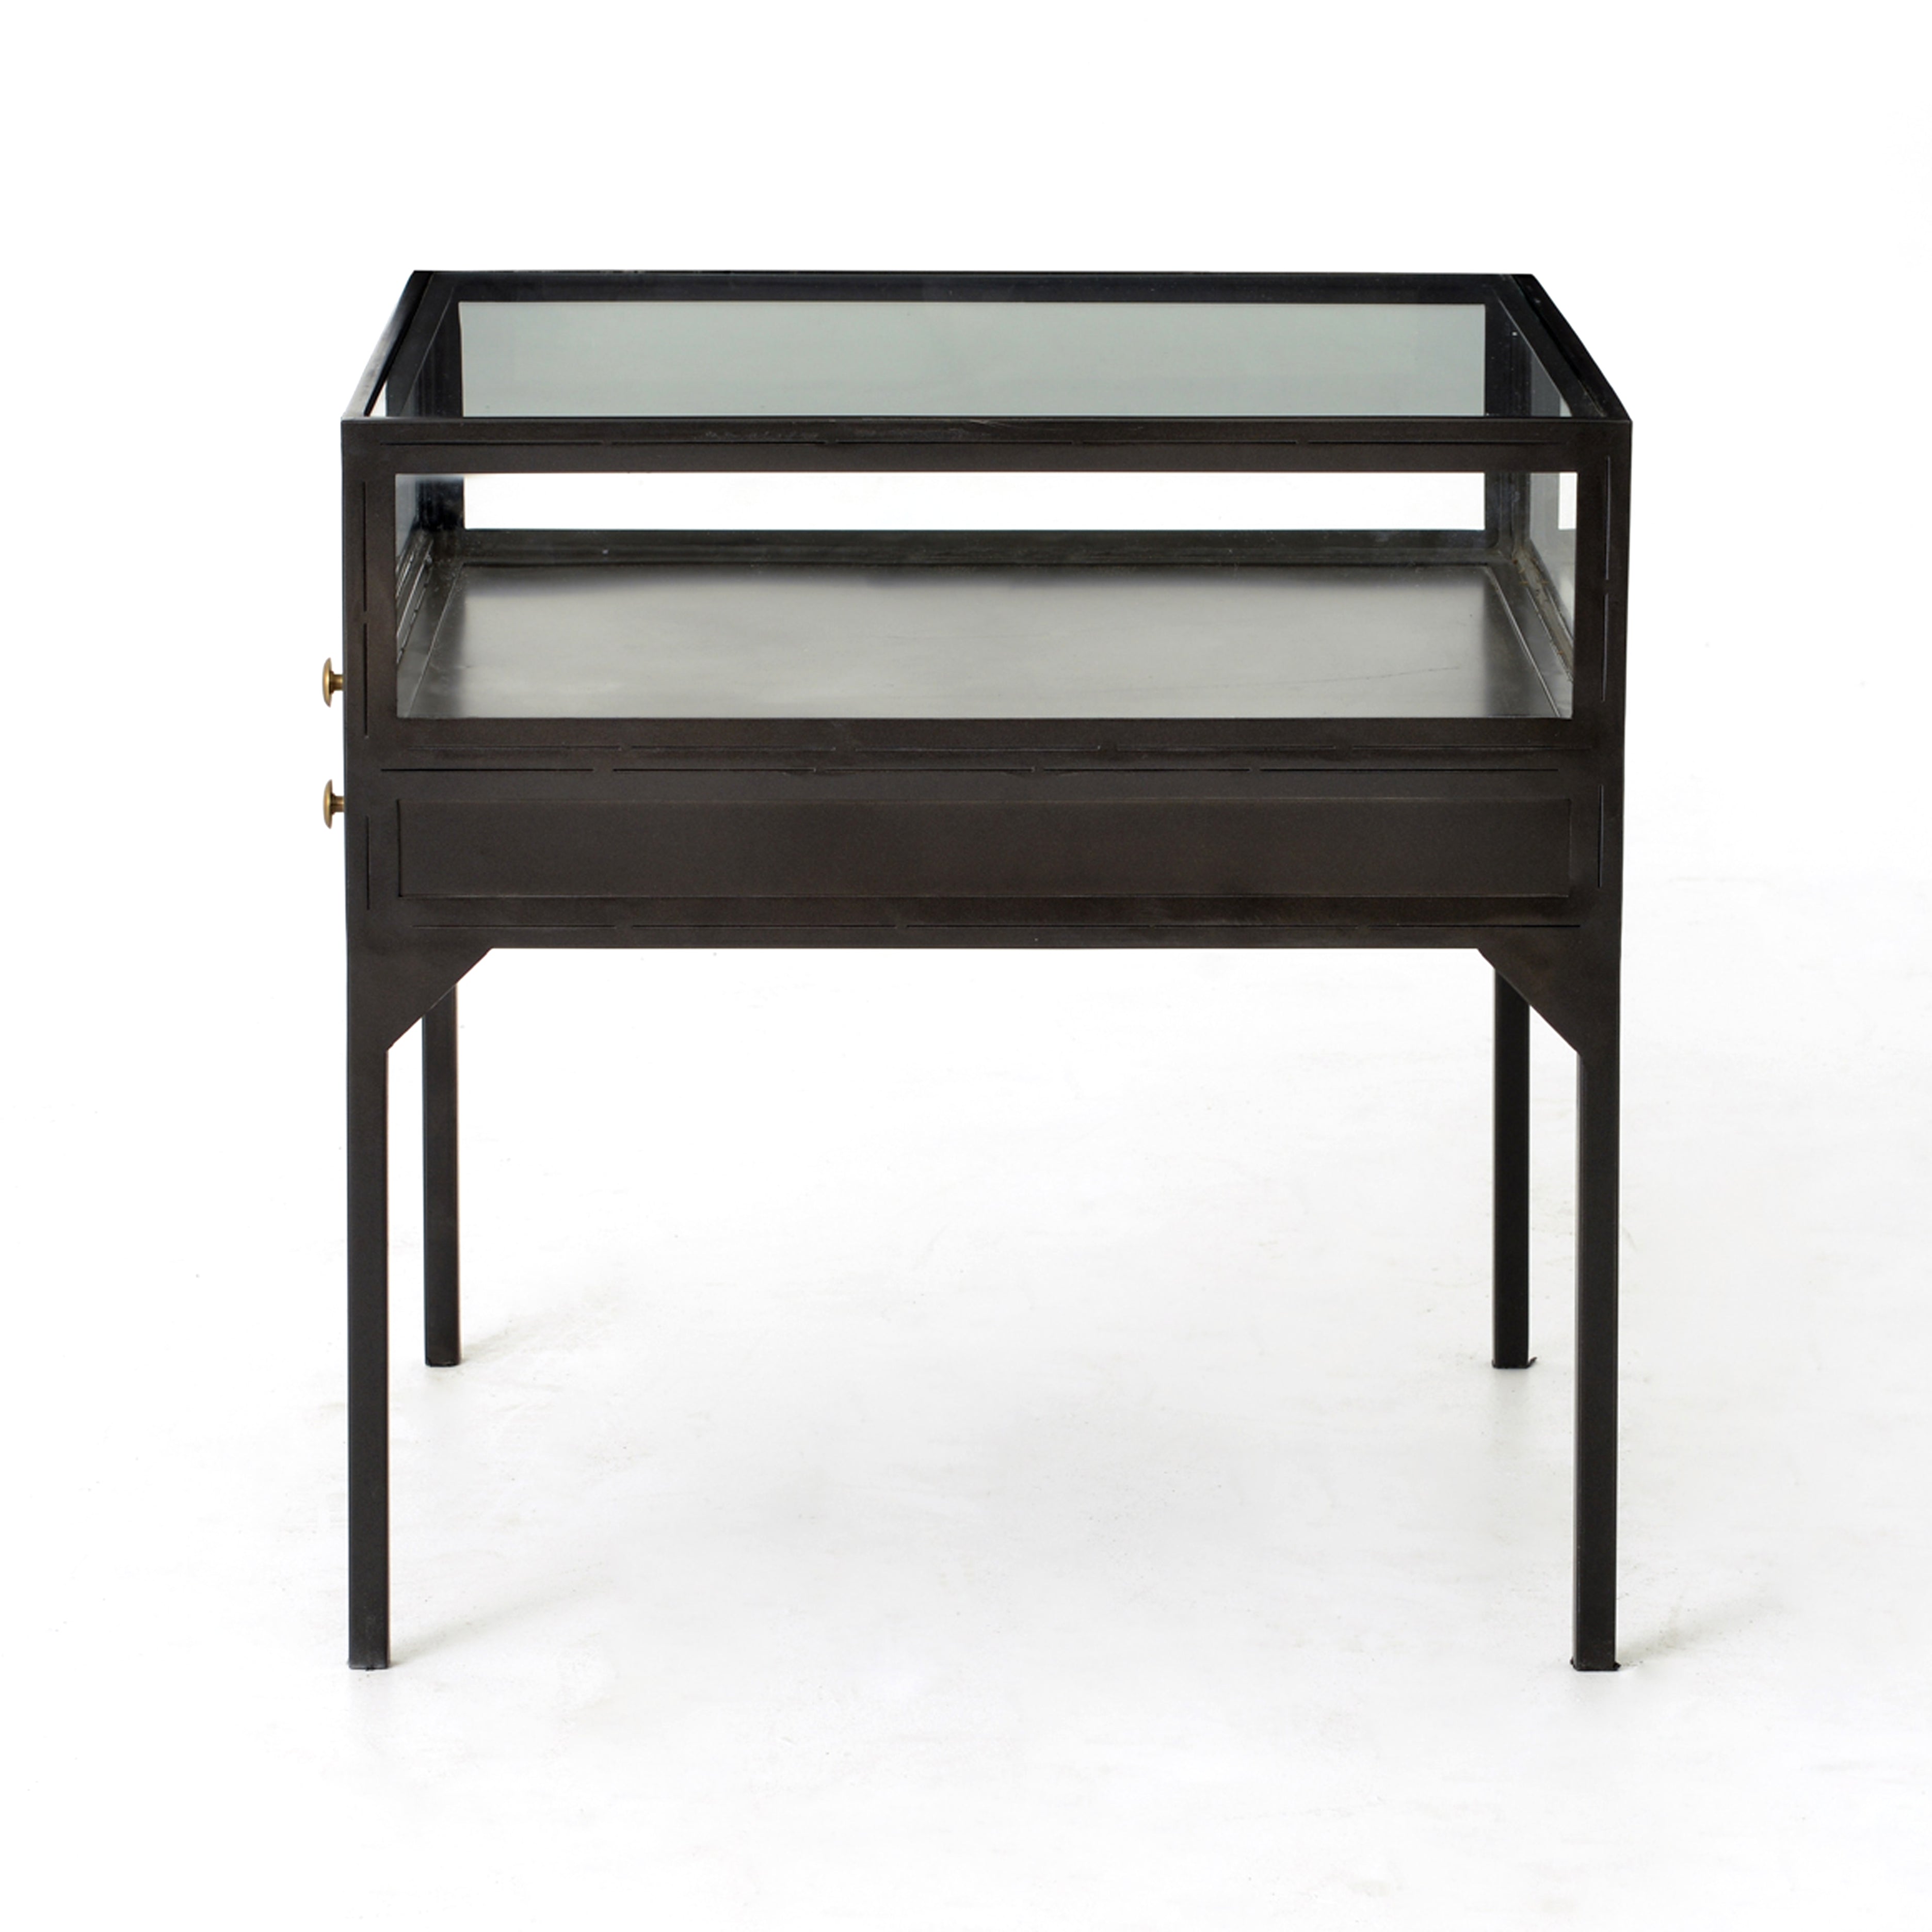 A shadowbox-inspired end table gives your inner collector a place to play. Frame prized possessions in a glass enclosure with matte-black metal and brass knobs. The perfect end table for a bed or sofa!